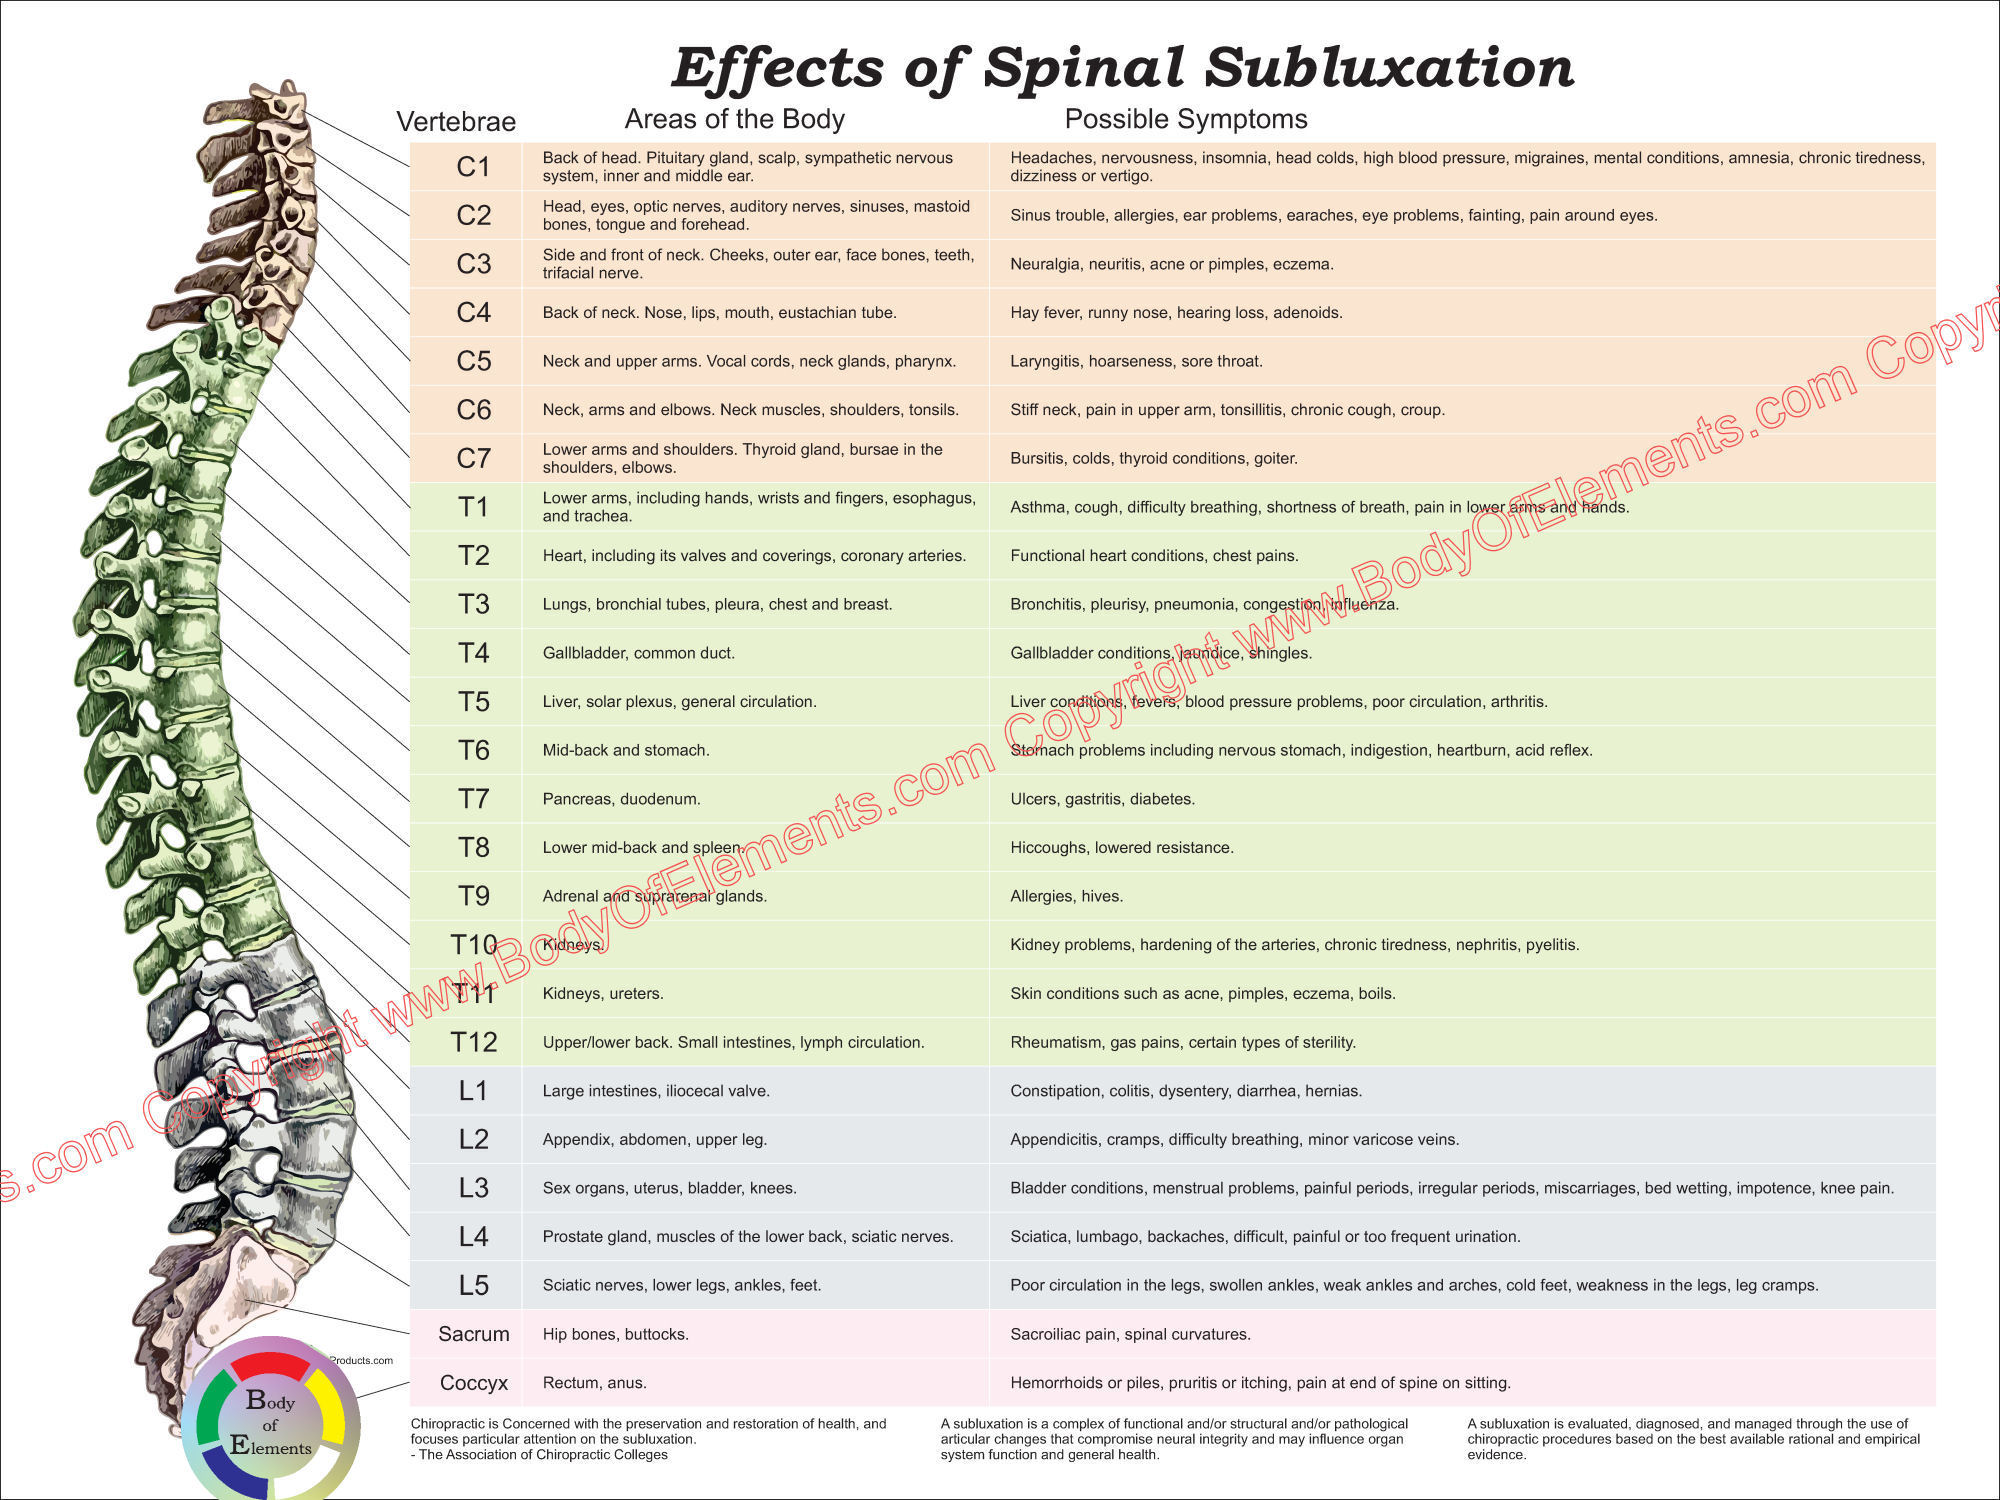 Effects of Spinal Subluxation Poster